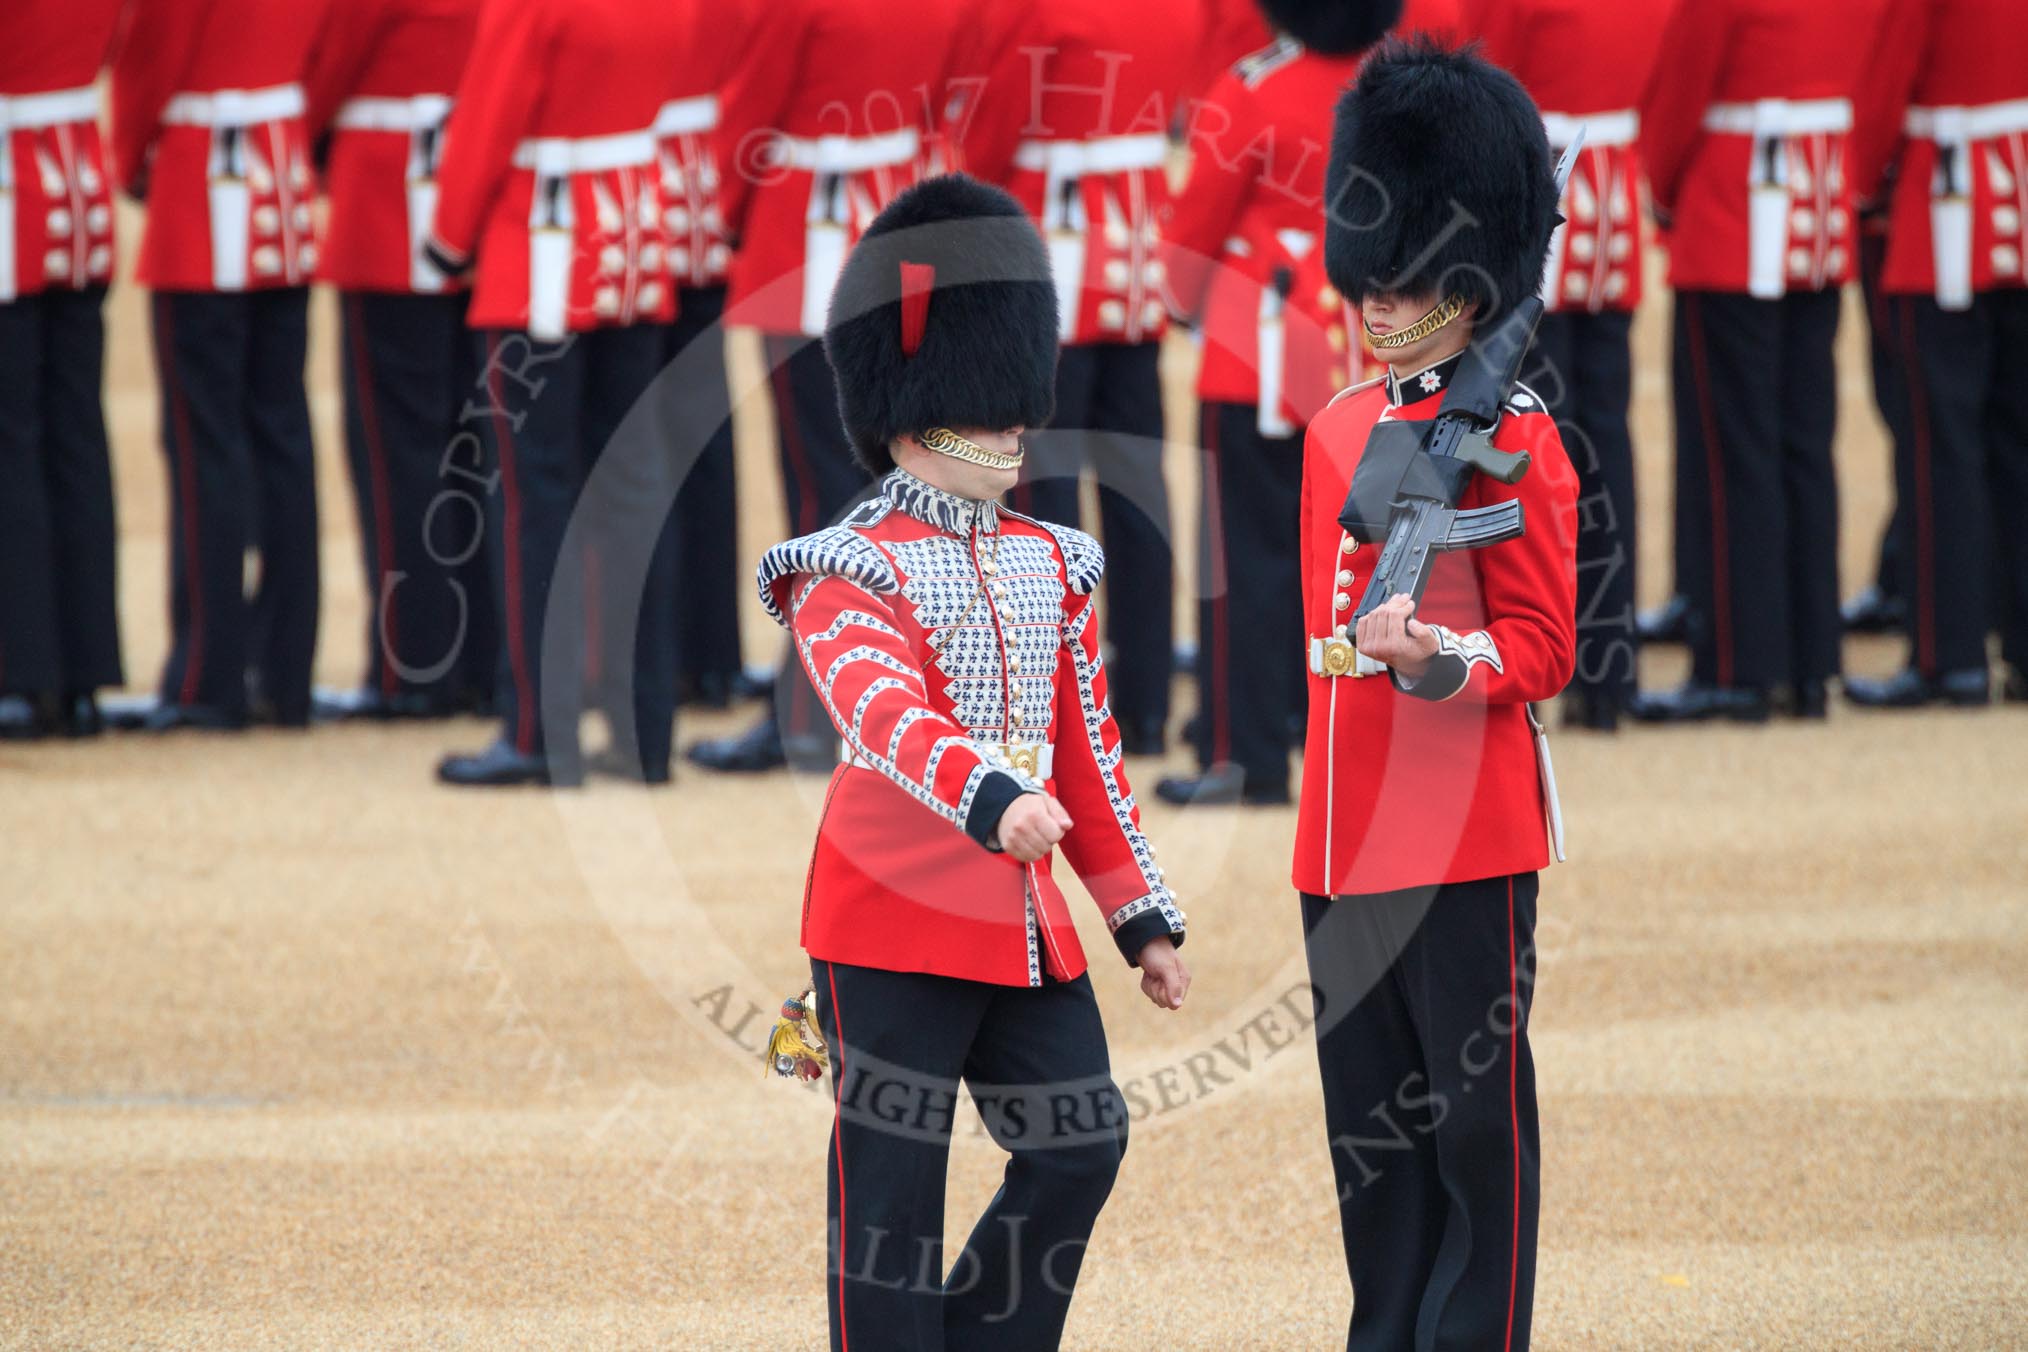 Duty Drummer Sam Orchard, marching around Colour Sentry Guardsman Jonathon Hughes (26), to uncase the Colour during The Colonel's Review 2018 (final rehearsal for Trooping the Colour, The Queen's Birthday Parade)  at Horse Guards Parade, Westminster, London, 2 June 2018, 10:33.